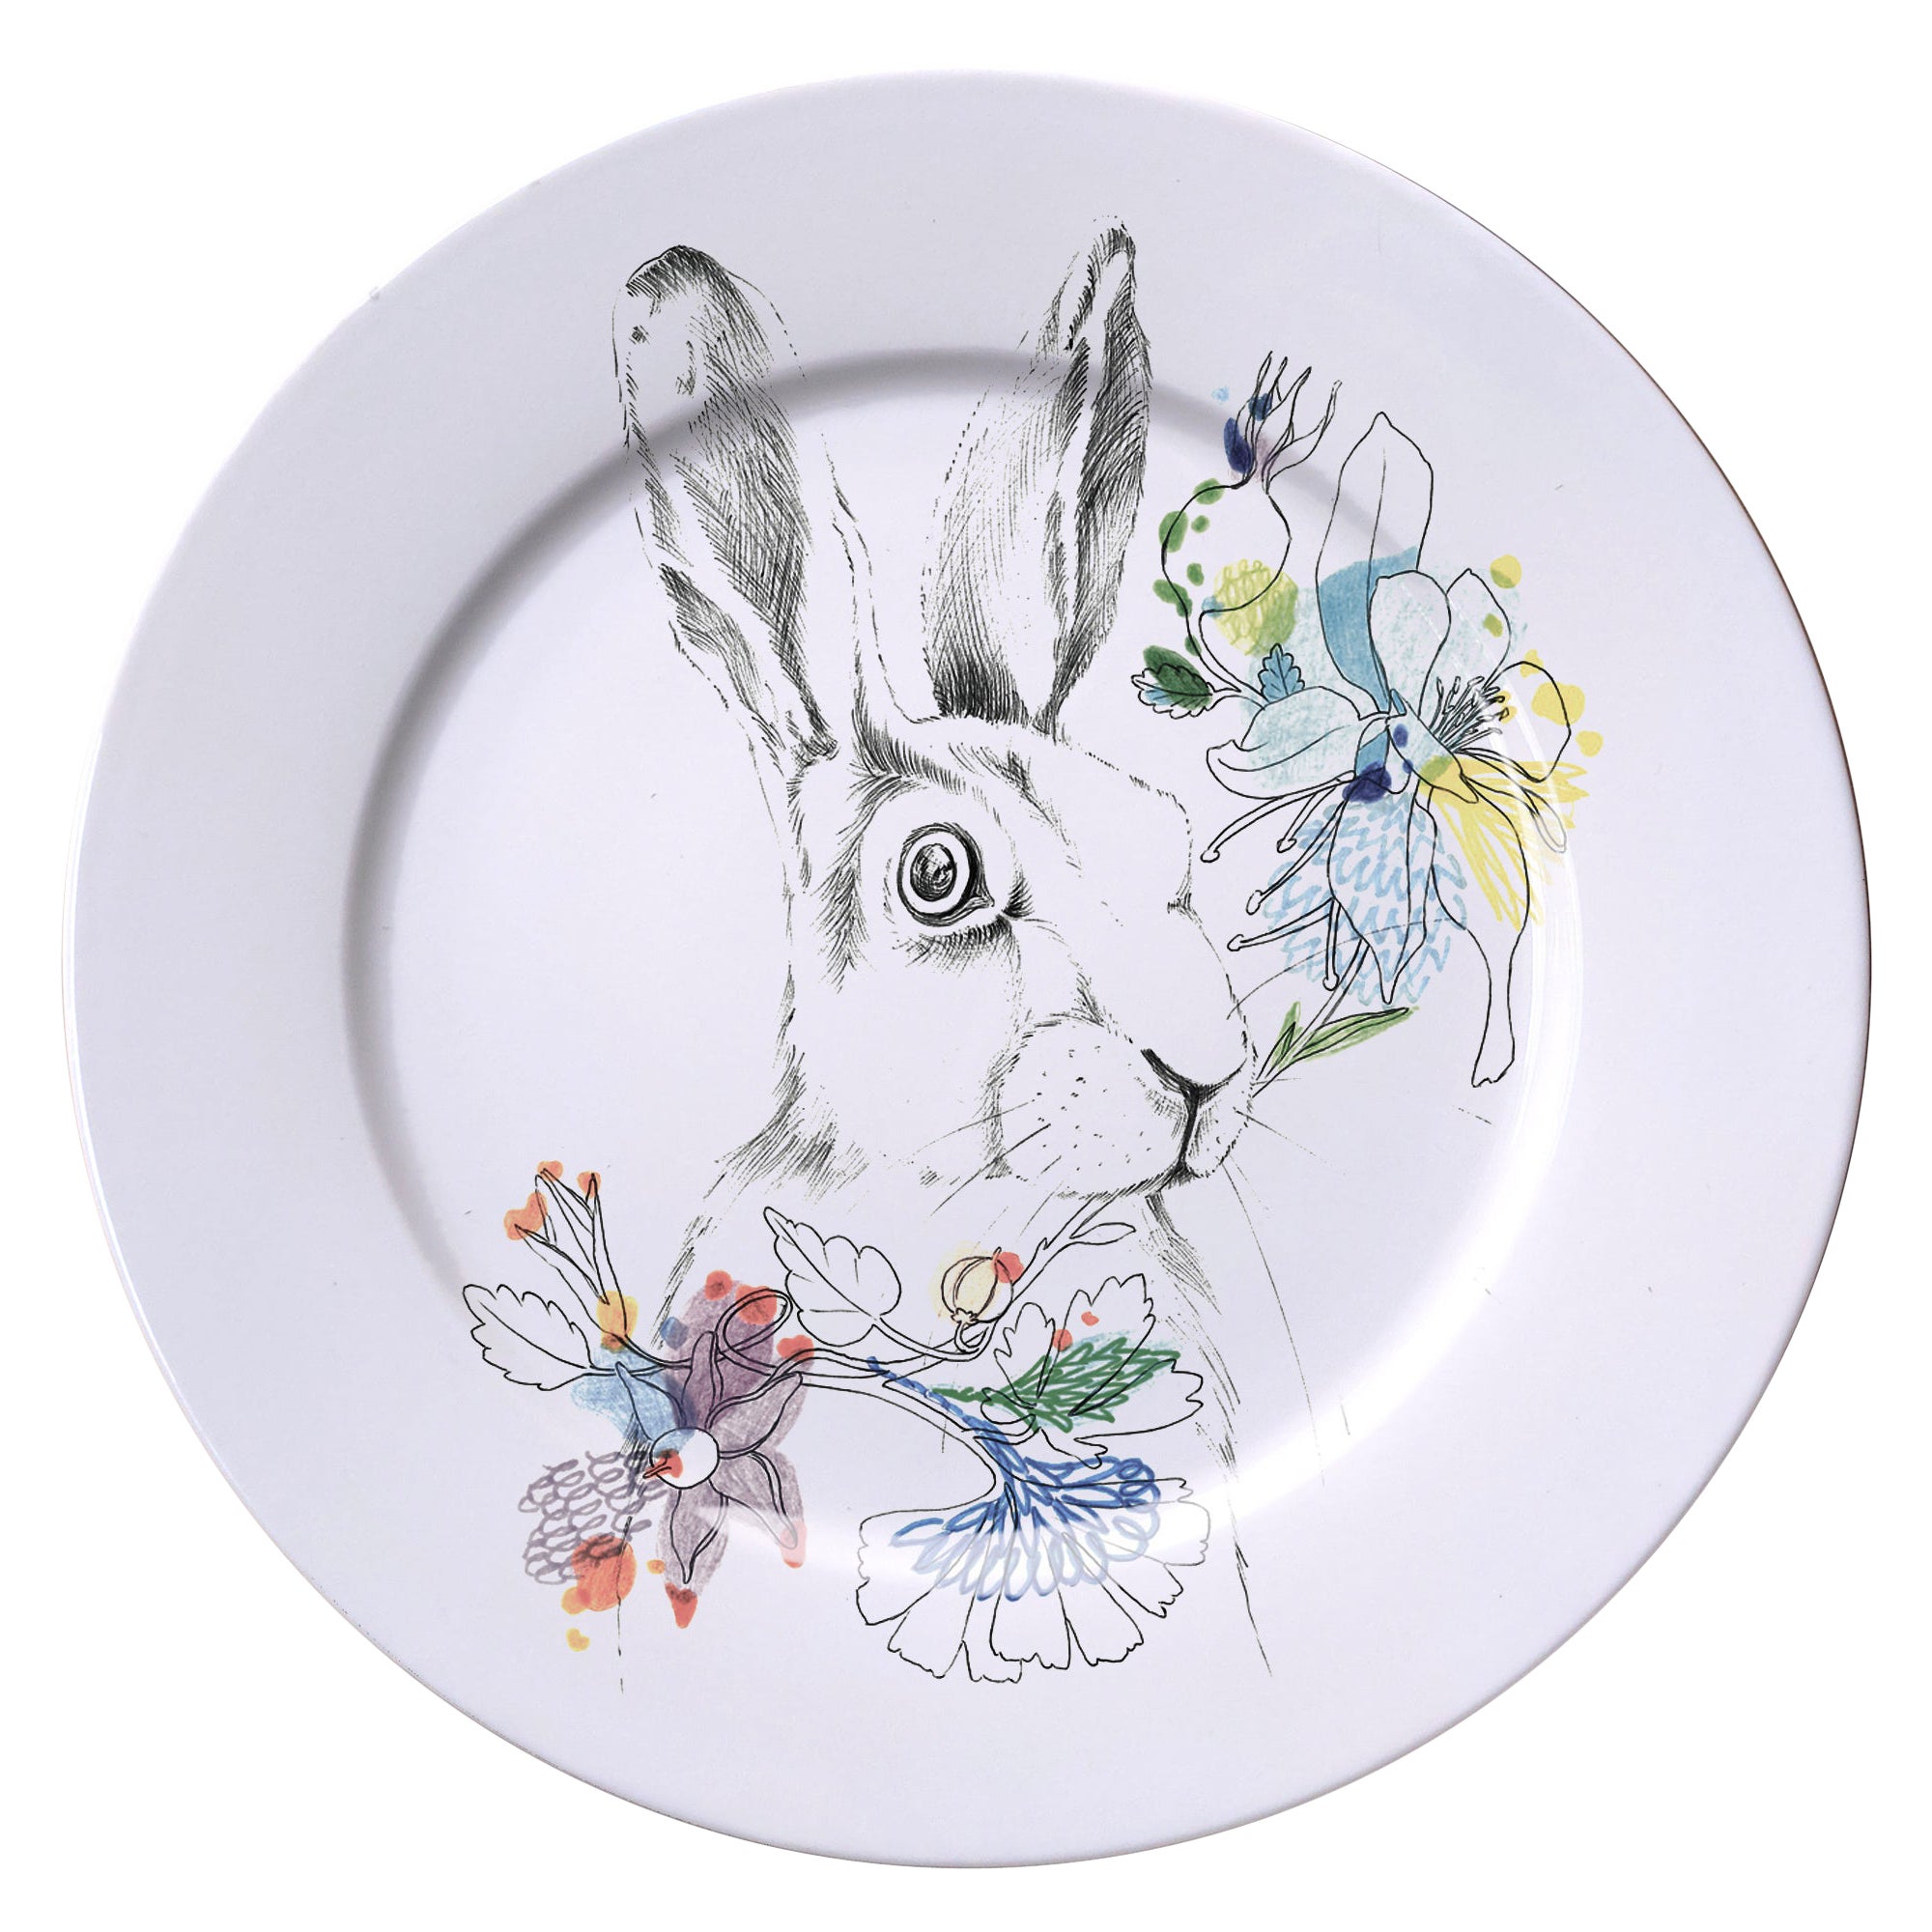 Ode to the Woods, Contemporary Porcelain Dinner Plate with Rabbit and Flowers